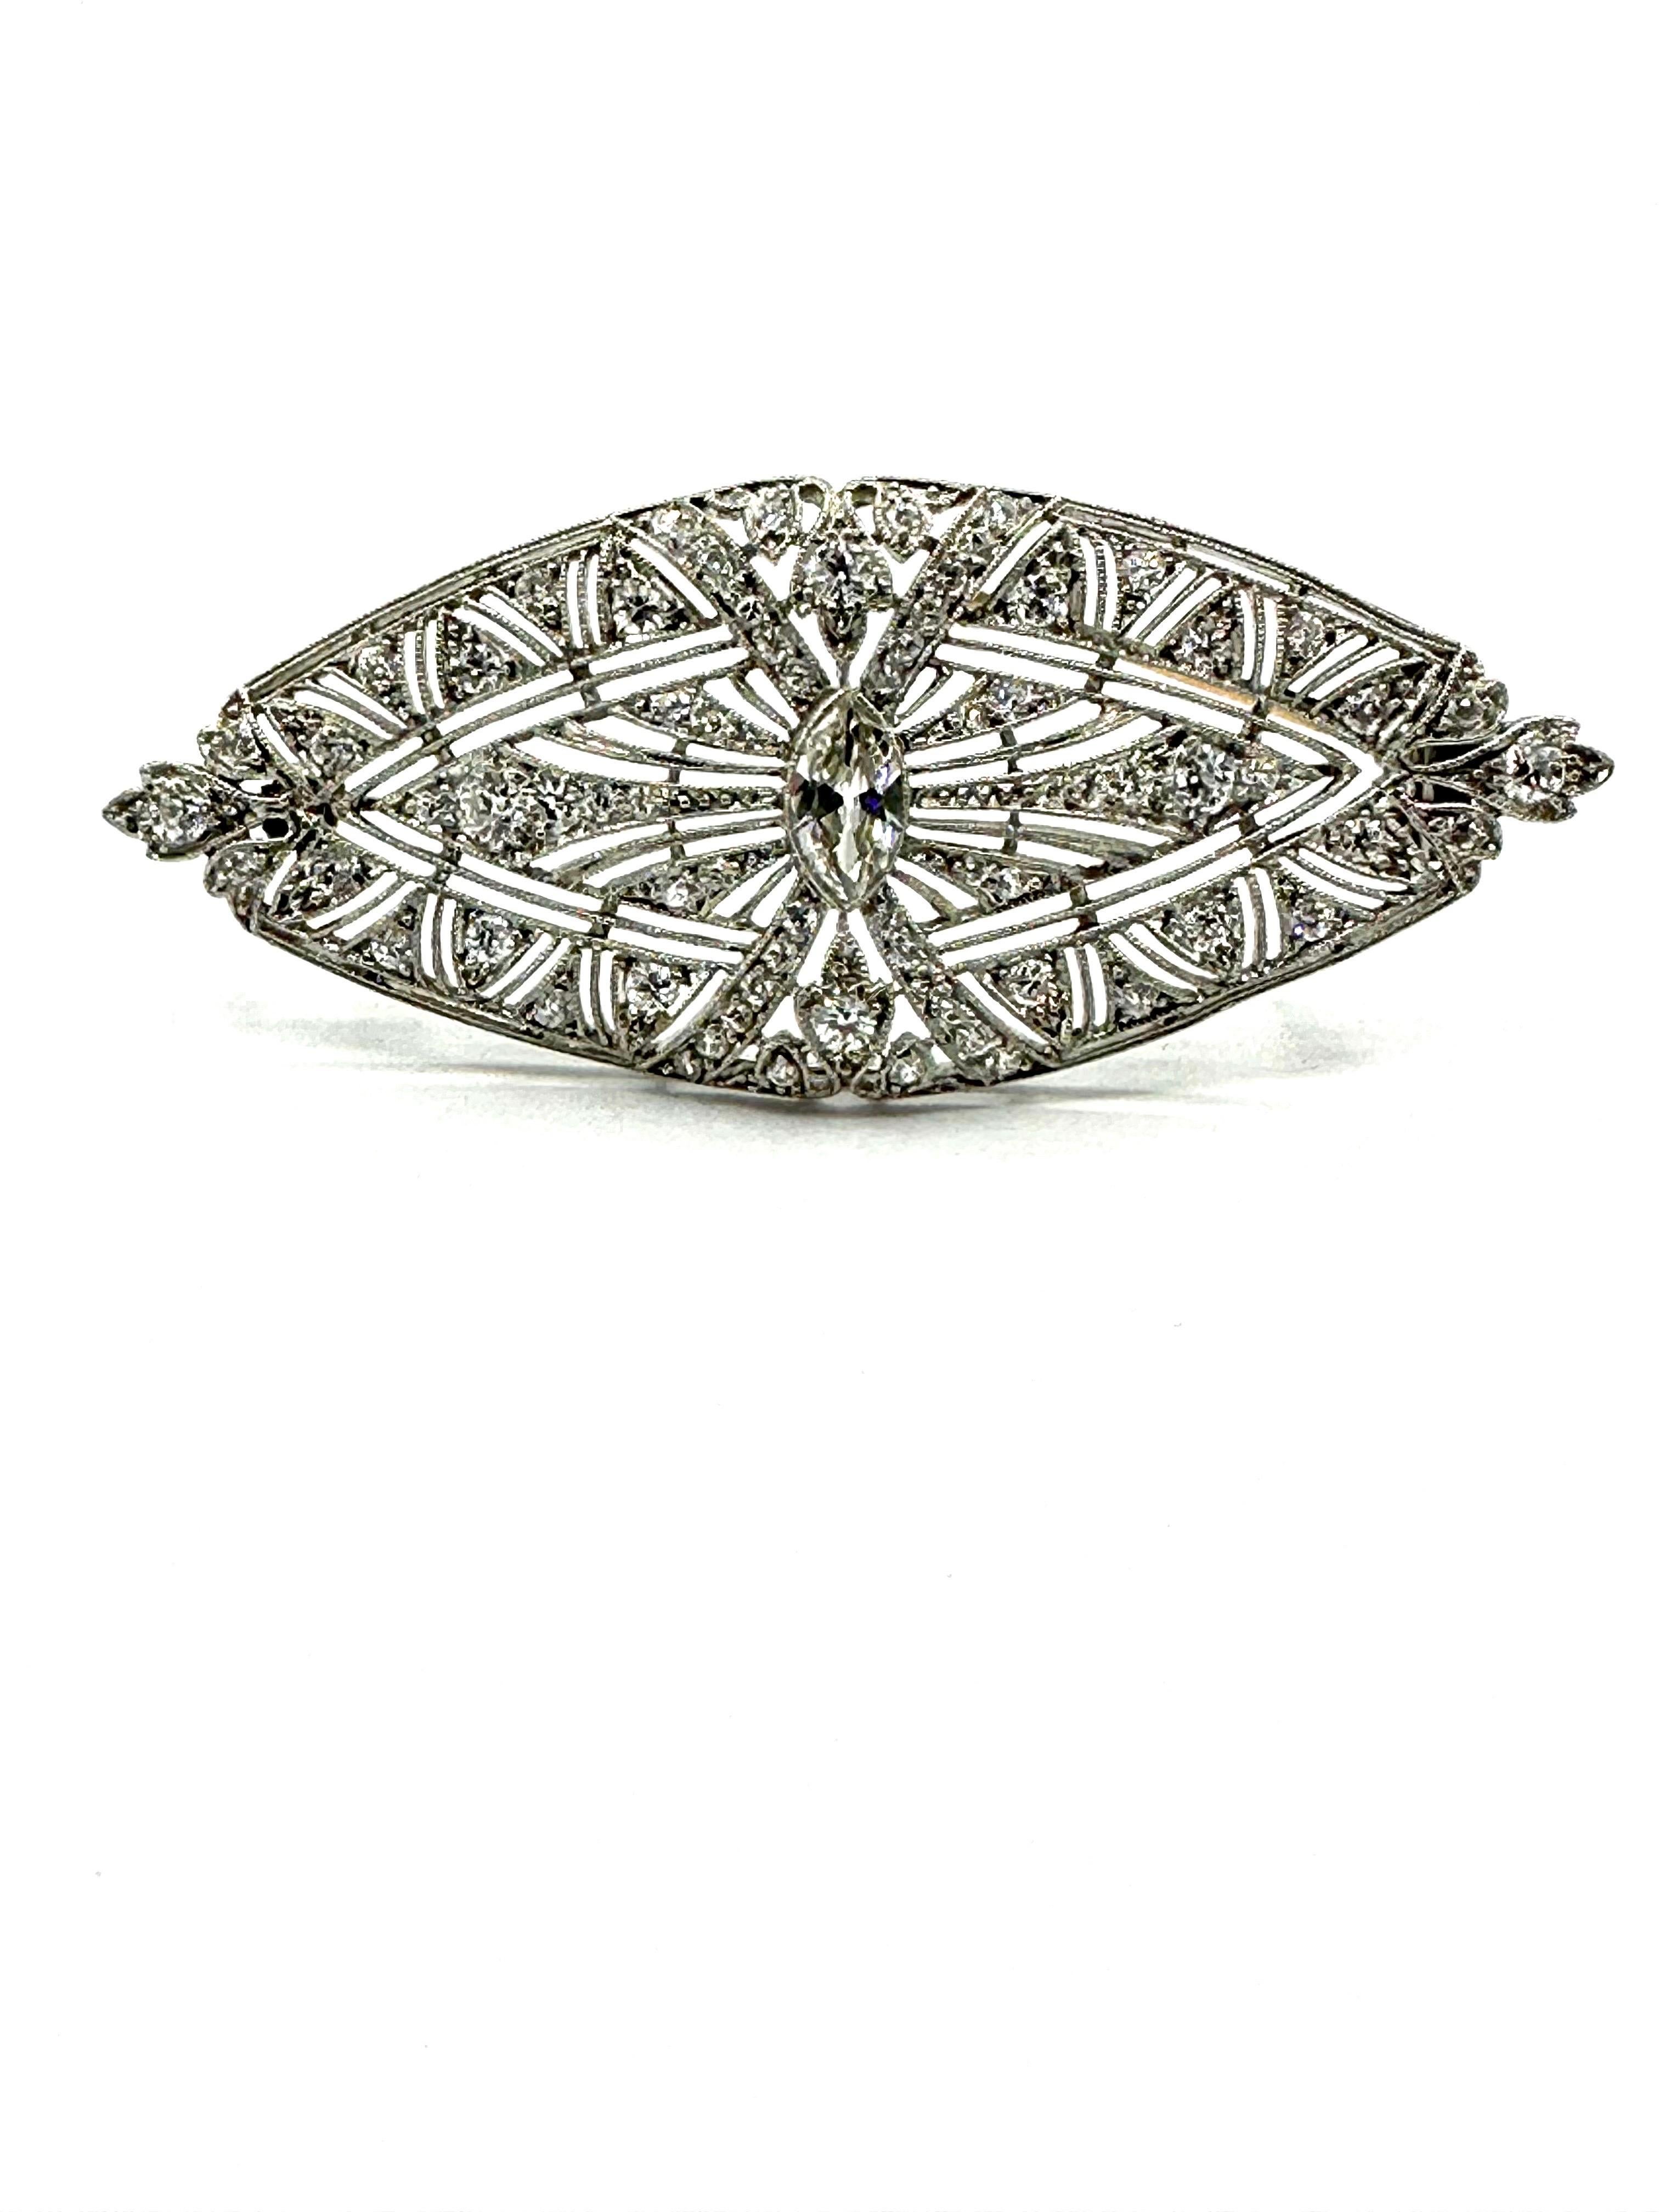 A simple and elegant Art Deco brooch.  The brooch has a center bezel set old European cut marquise Diamond.  The marquise is set with 74 old European cut and single cut Diamonds throughout the rest of the brooch.  The brooch contains a single pin